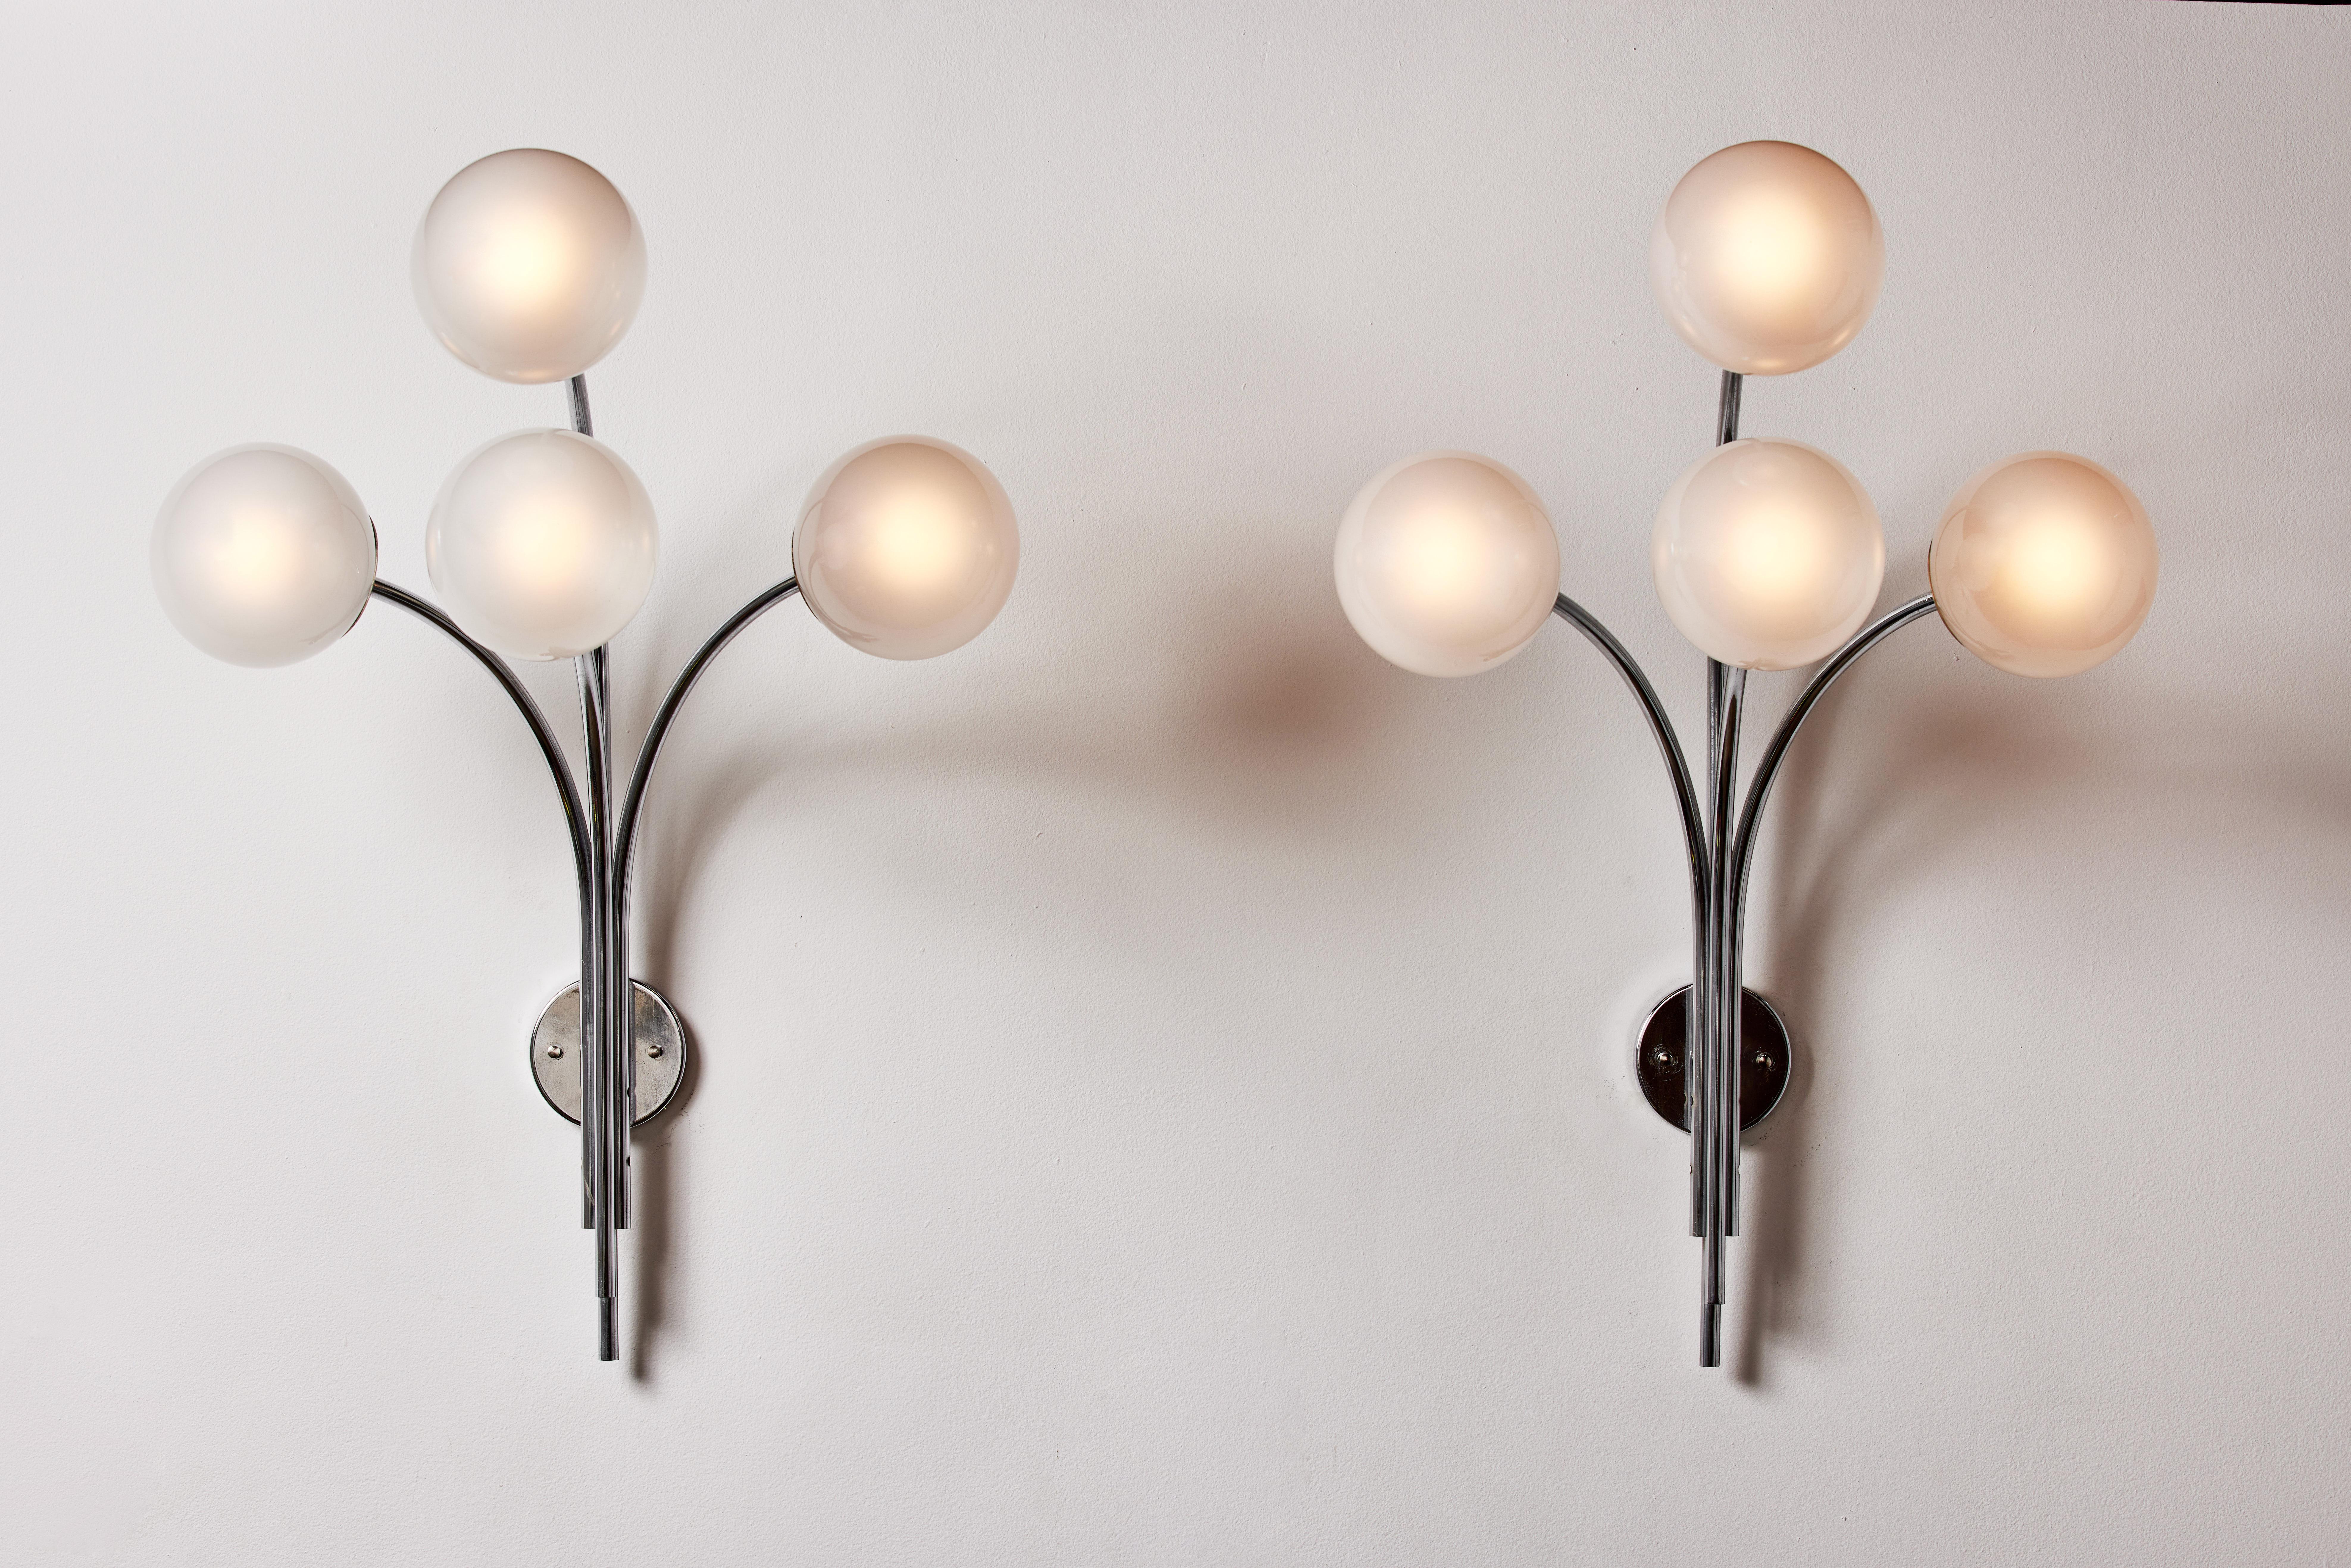 Pair of model 257 wall lights by Sergio Asti for Arteluce. Designed and manufactured in Italy, circa the 1960s. Frosted glass diffusers, chrome armature. Retains original manufacturer's label. Wired for U.S. standards. We recommend 40w maximum